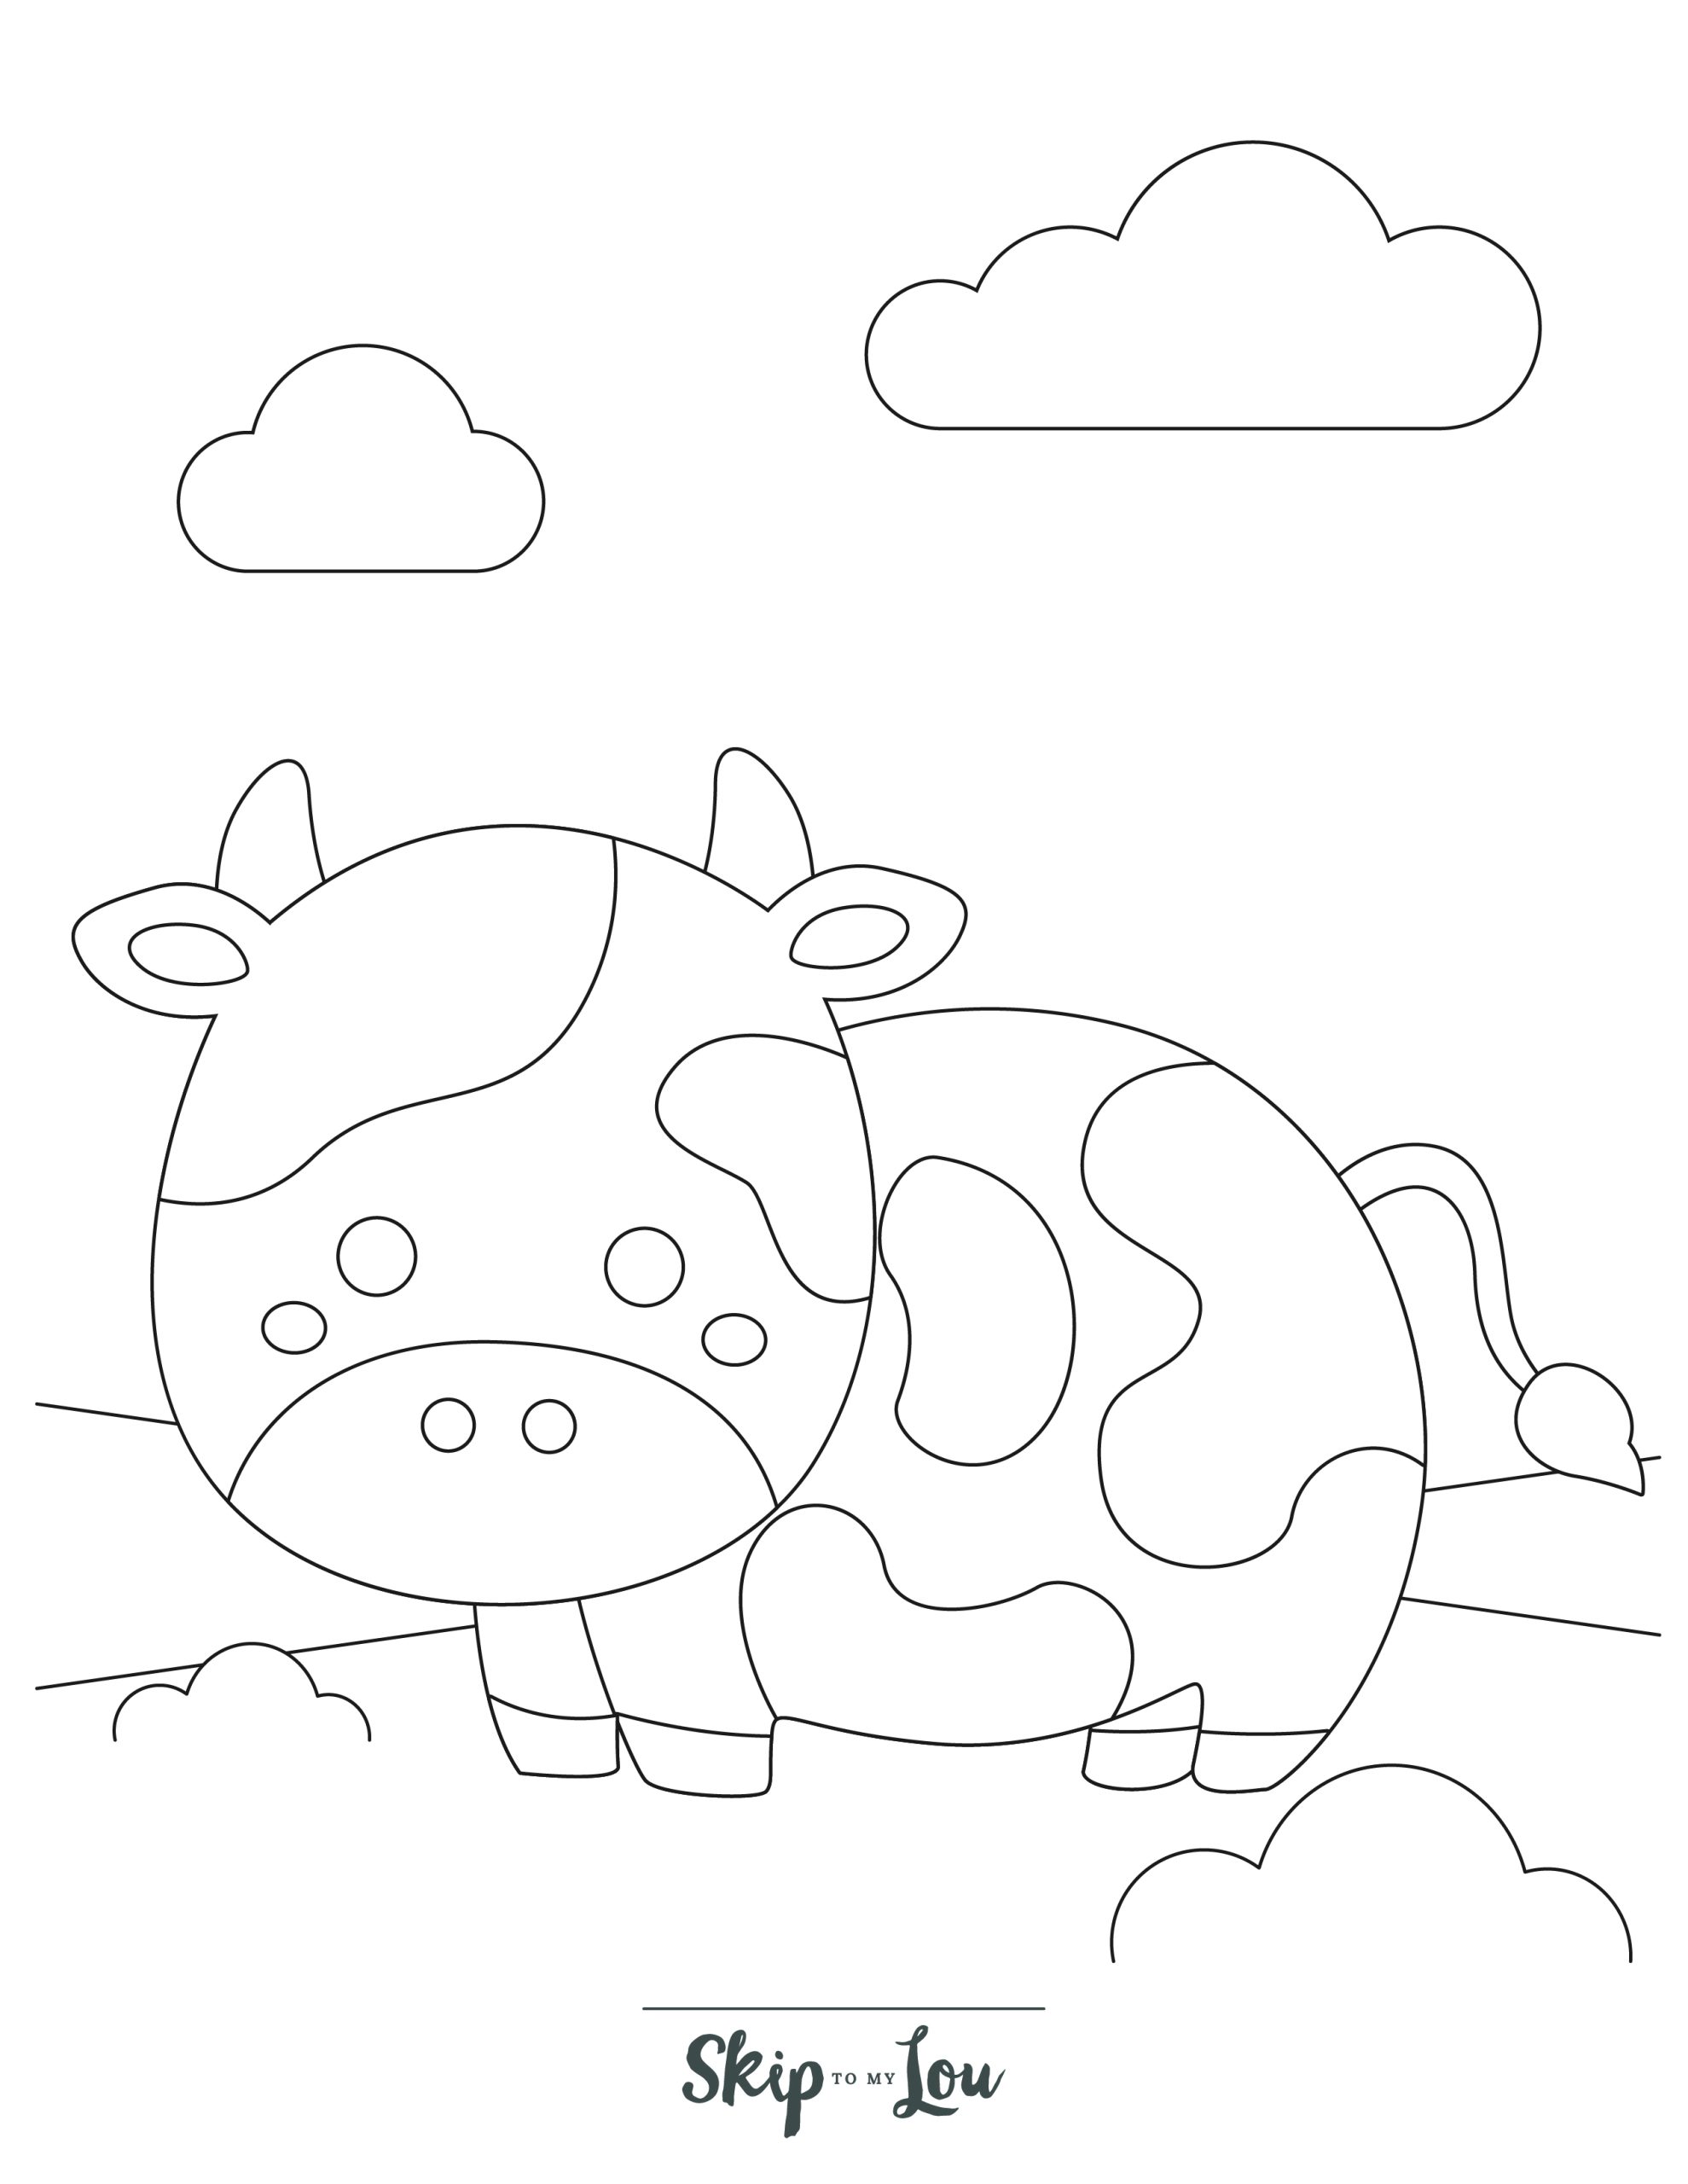 Preschool Coloring Page 2 - Simple line drawing of a cow in a field